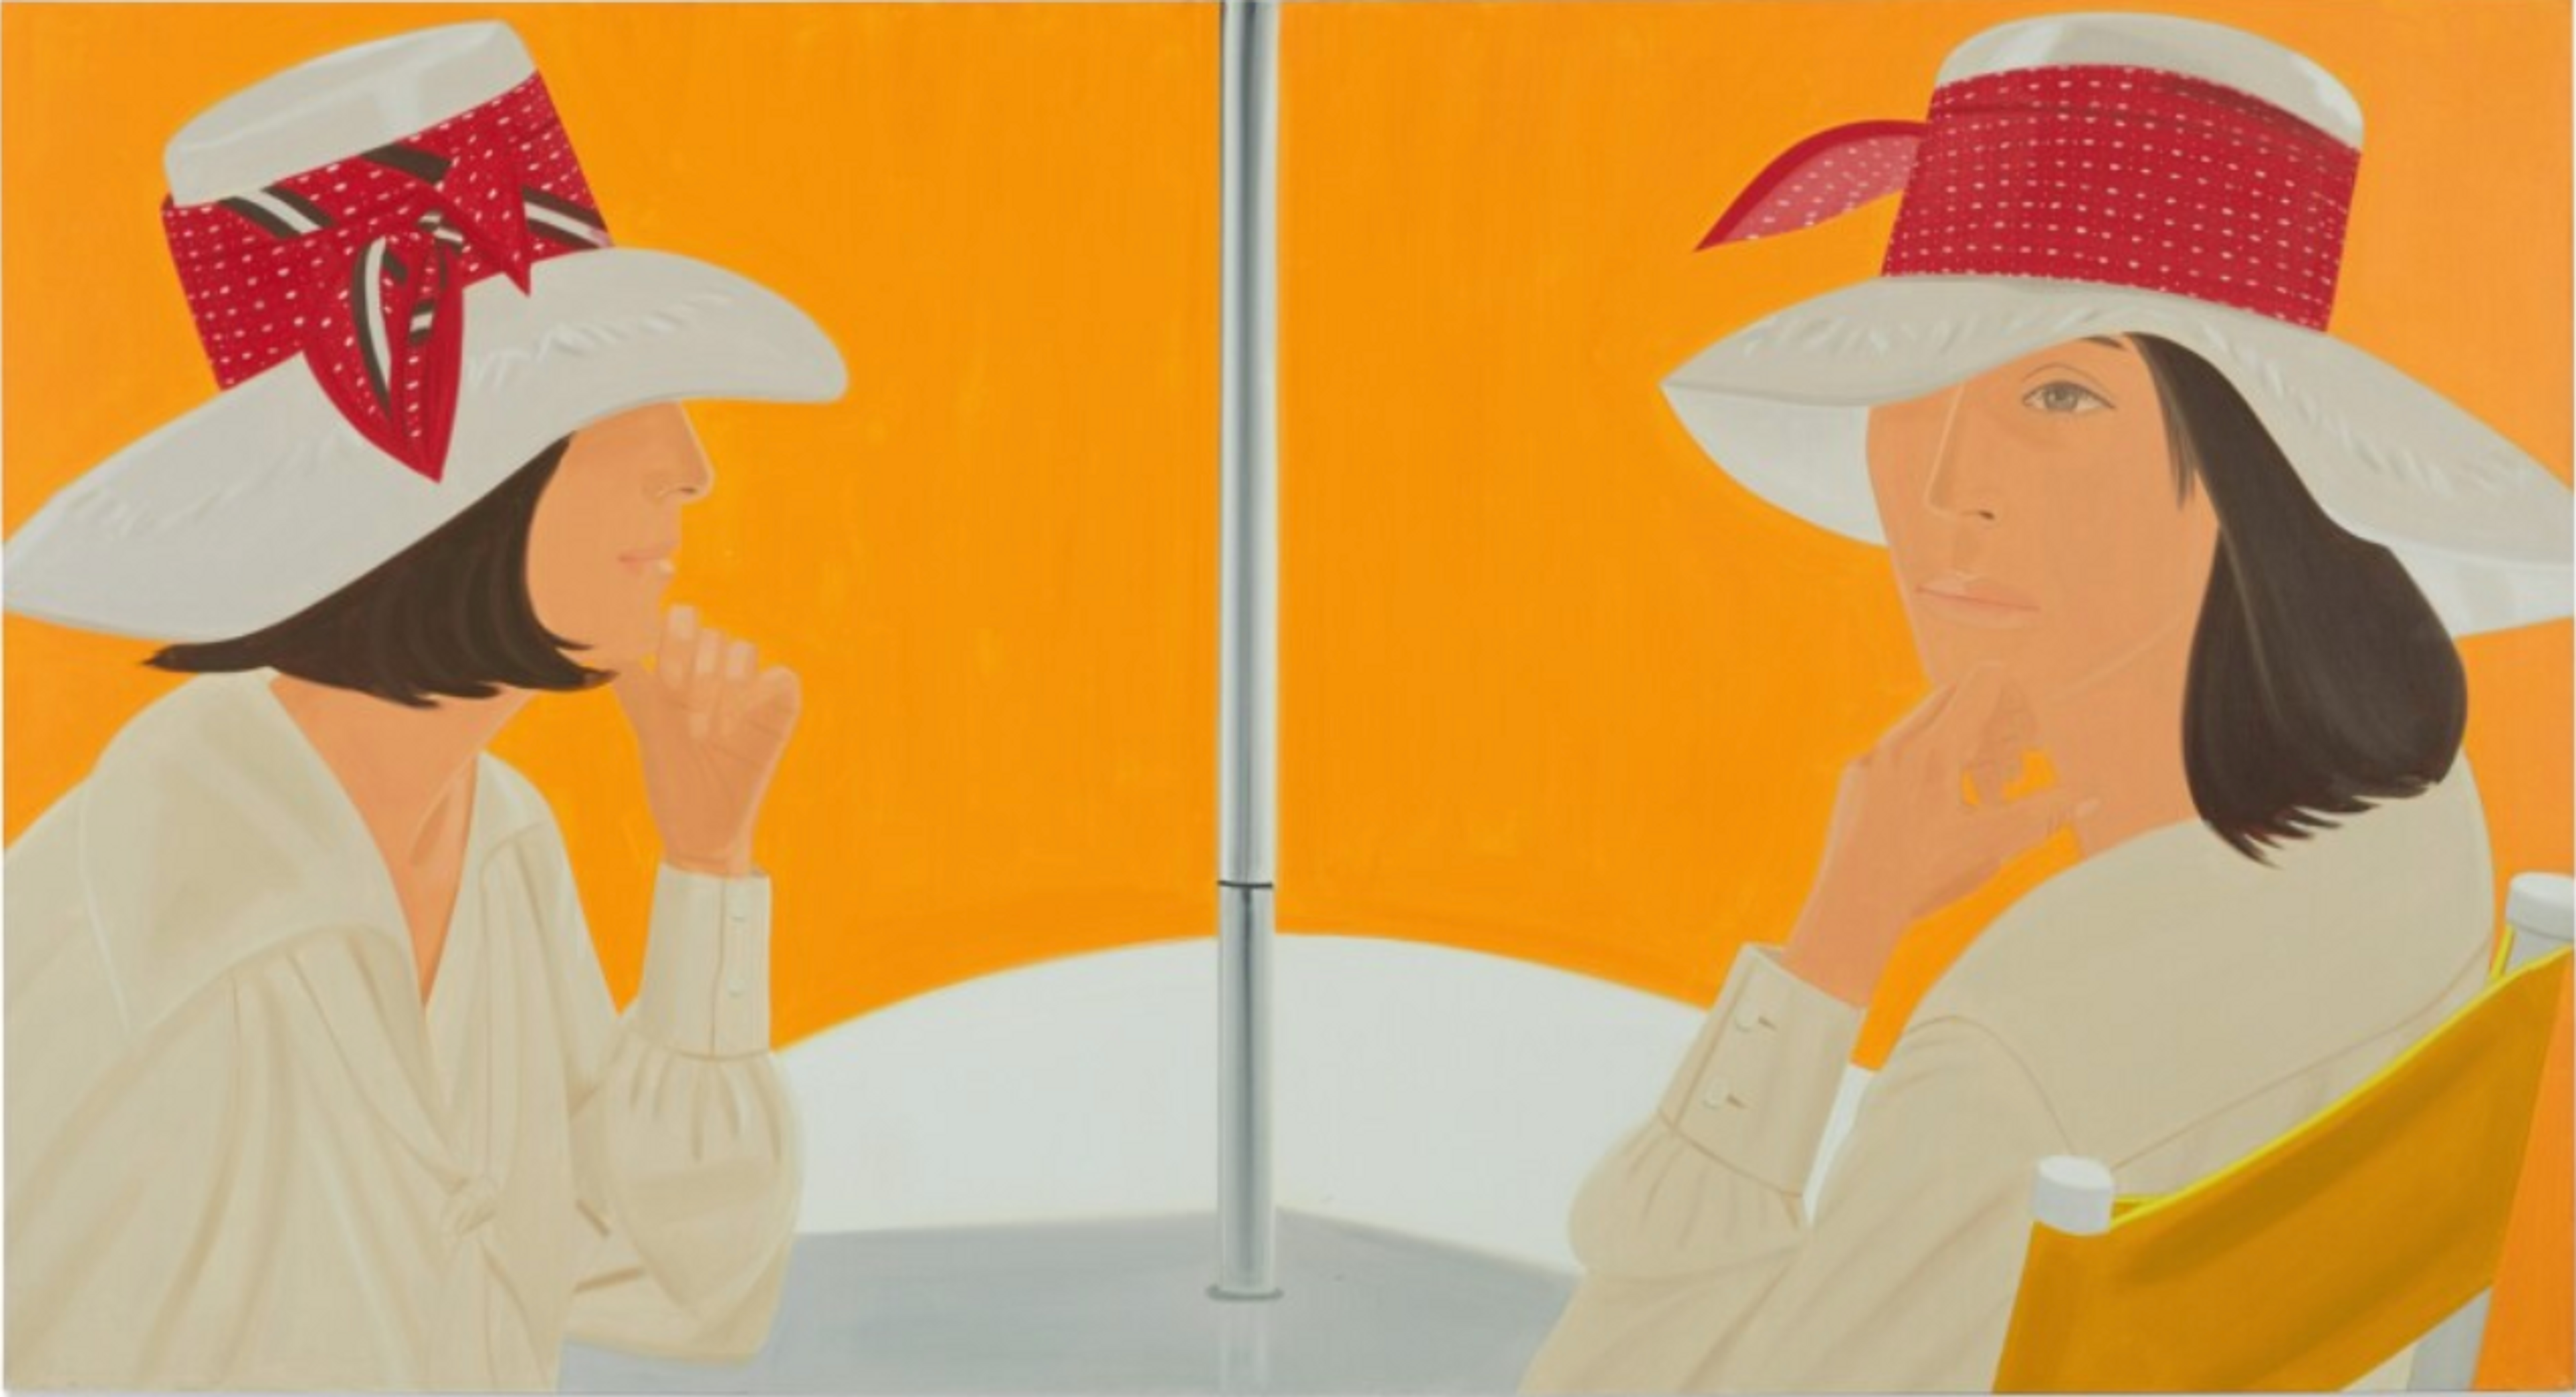 The Red Band by Alex Katz 